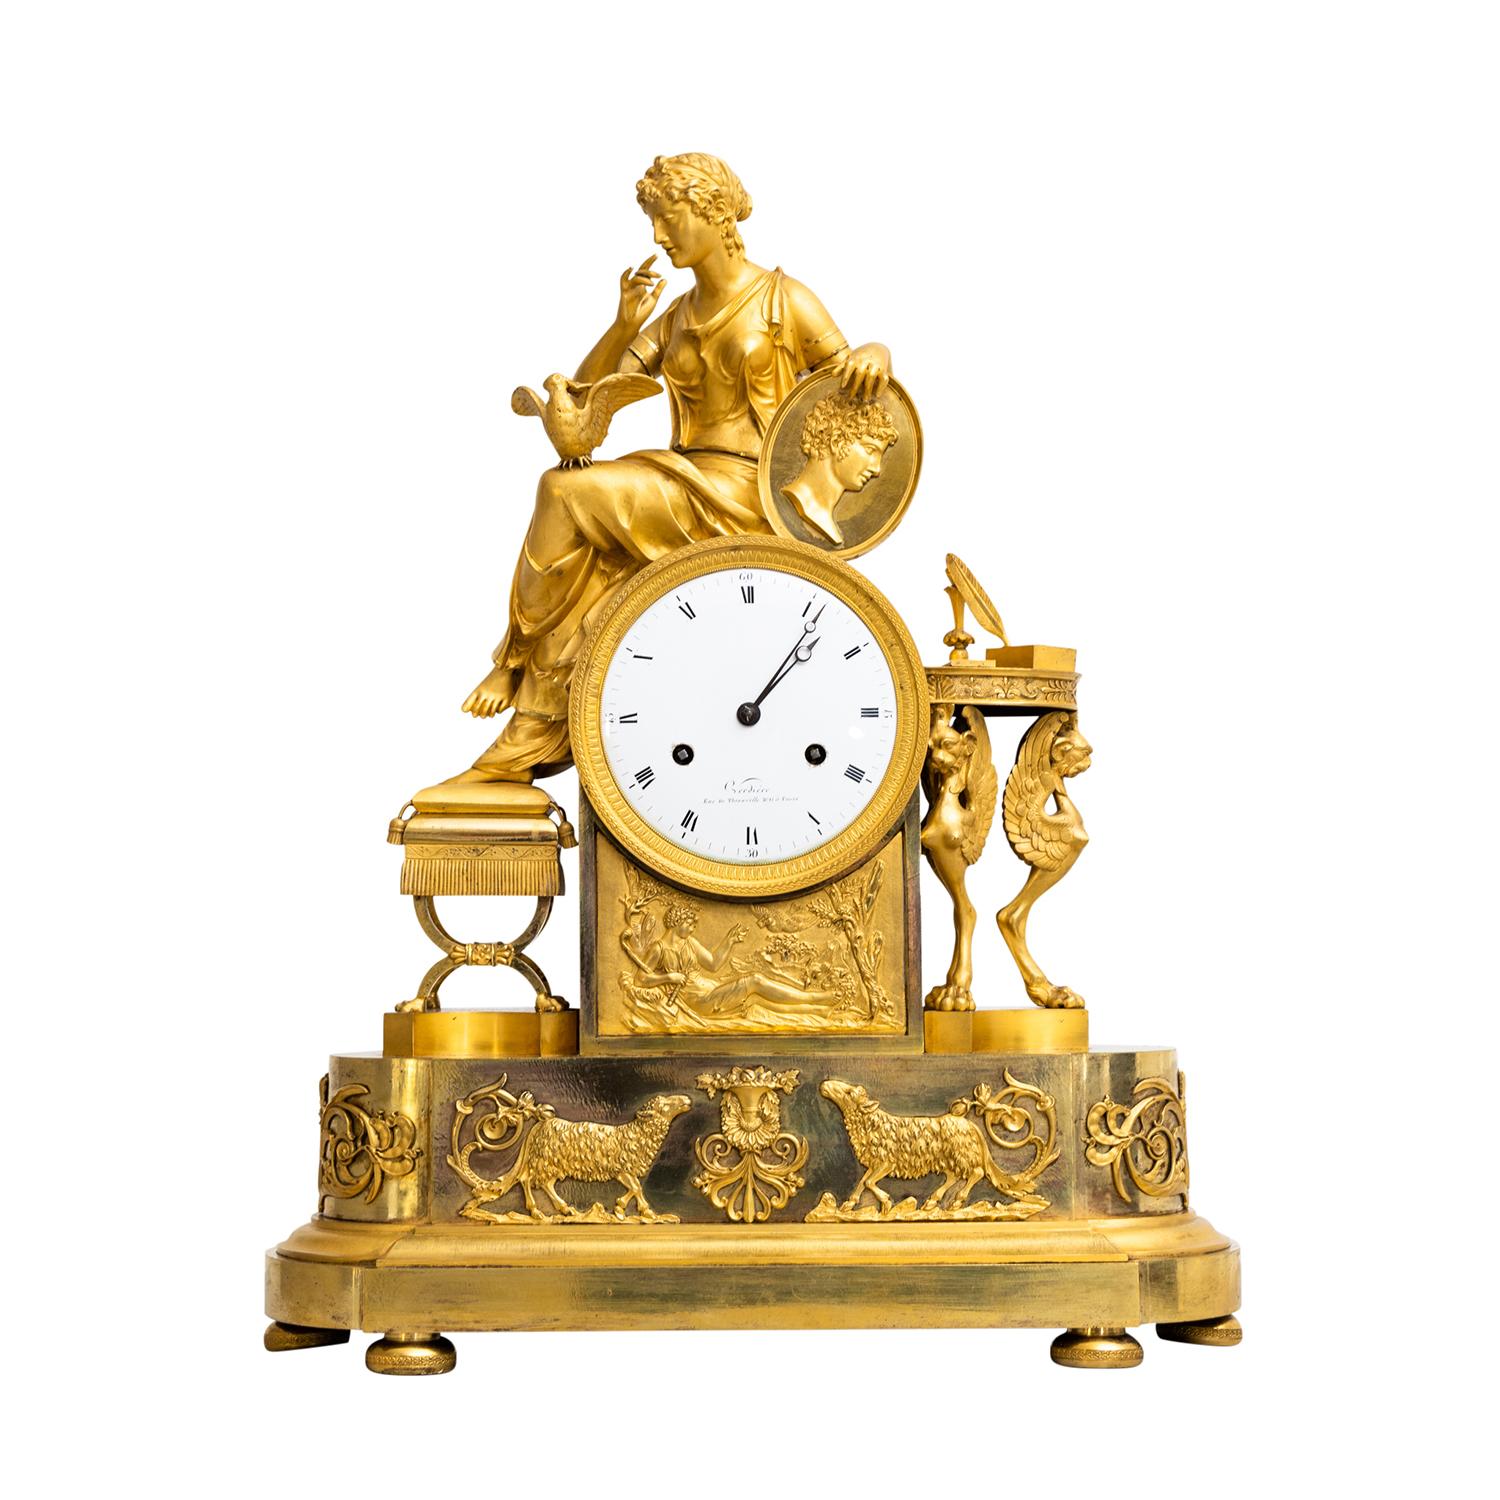 A gold, antique French table clock, pendulum made of hand crafted fire-gilded bronze, in good condition. The circular enamel dial of the Parisian pendule is detailed with Roman numerals and Arabic quarter markers on a white background,